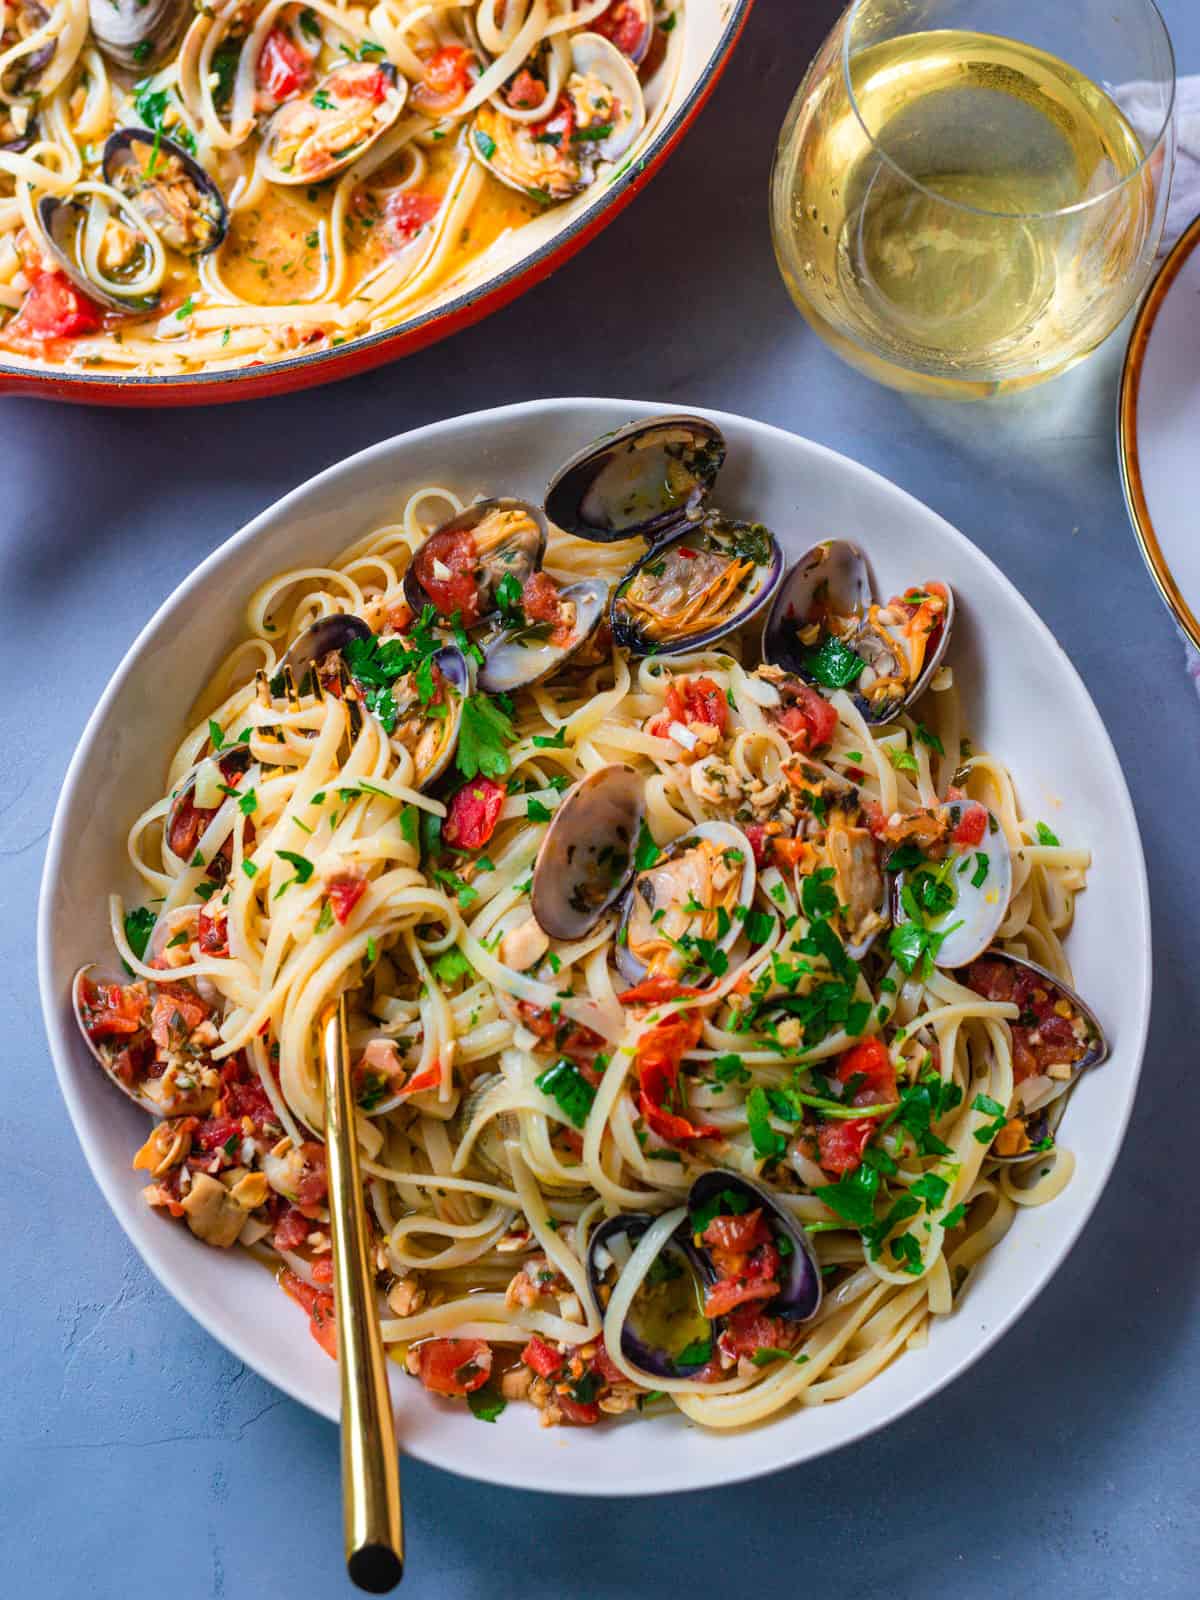 Pasta with clams and tomatoes.